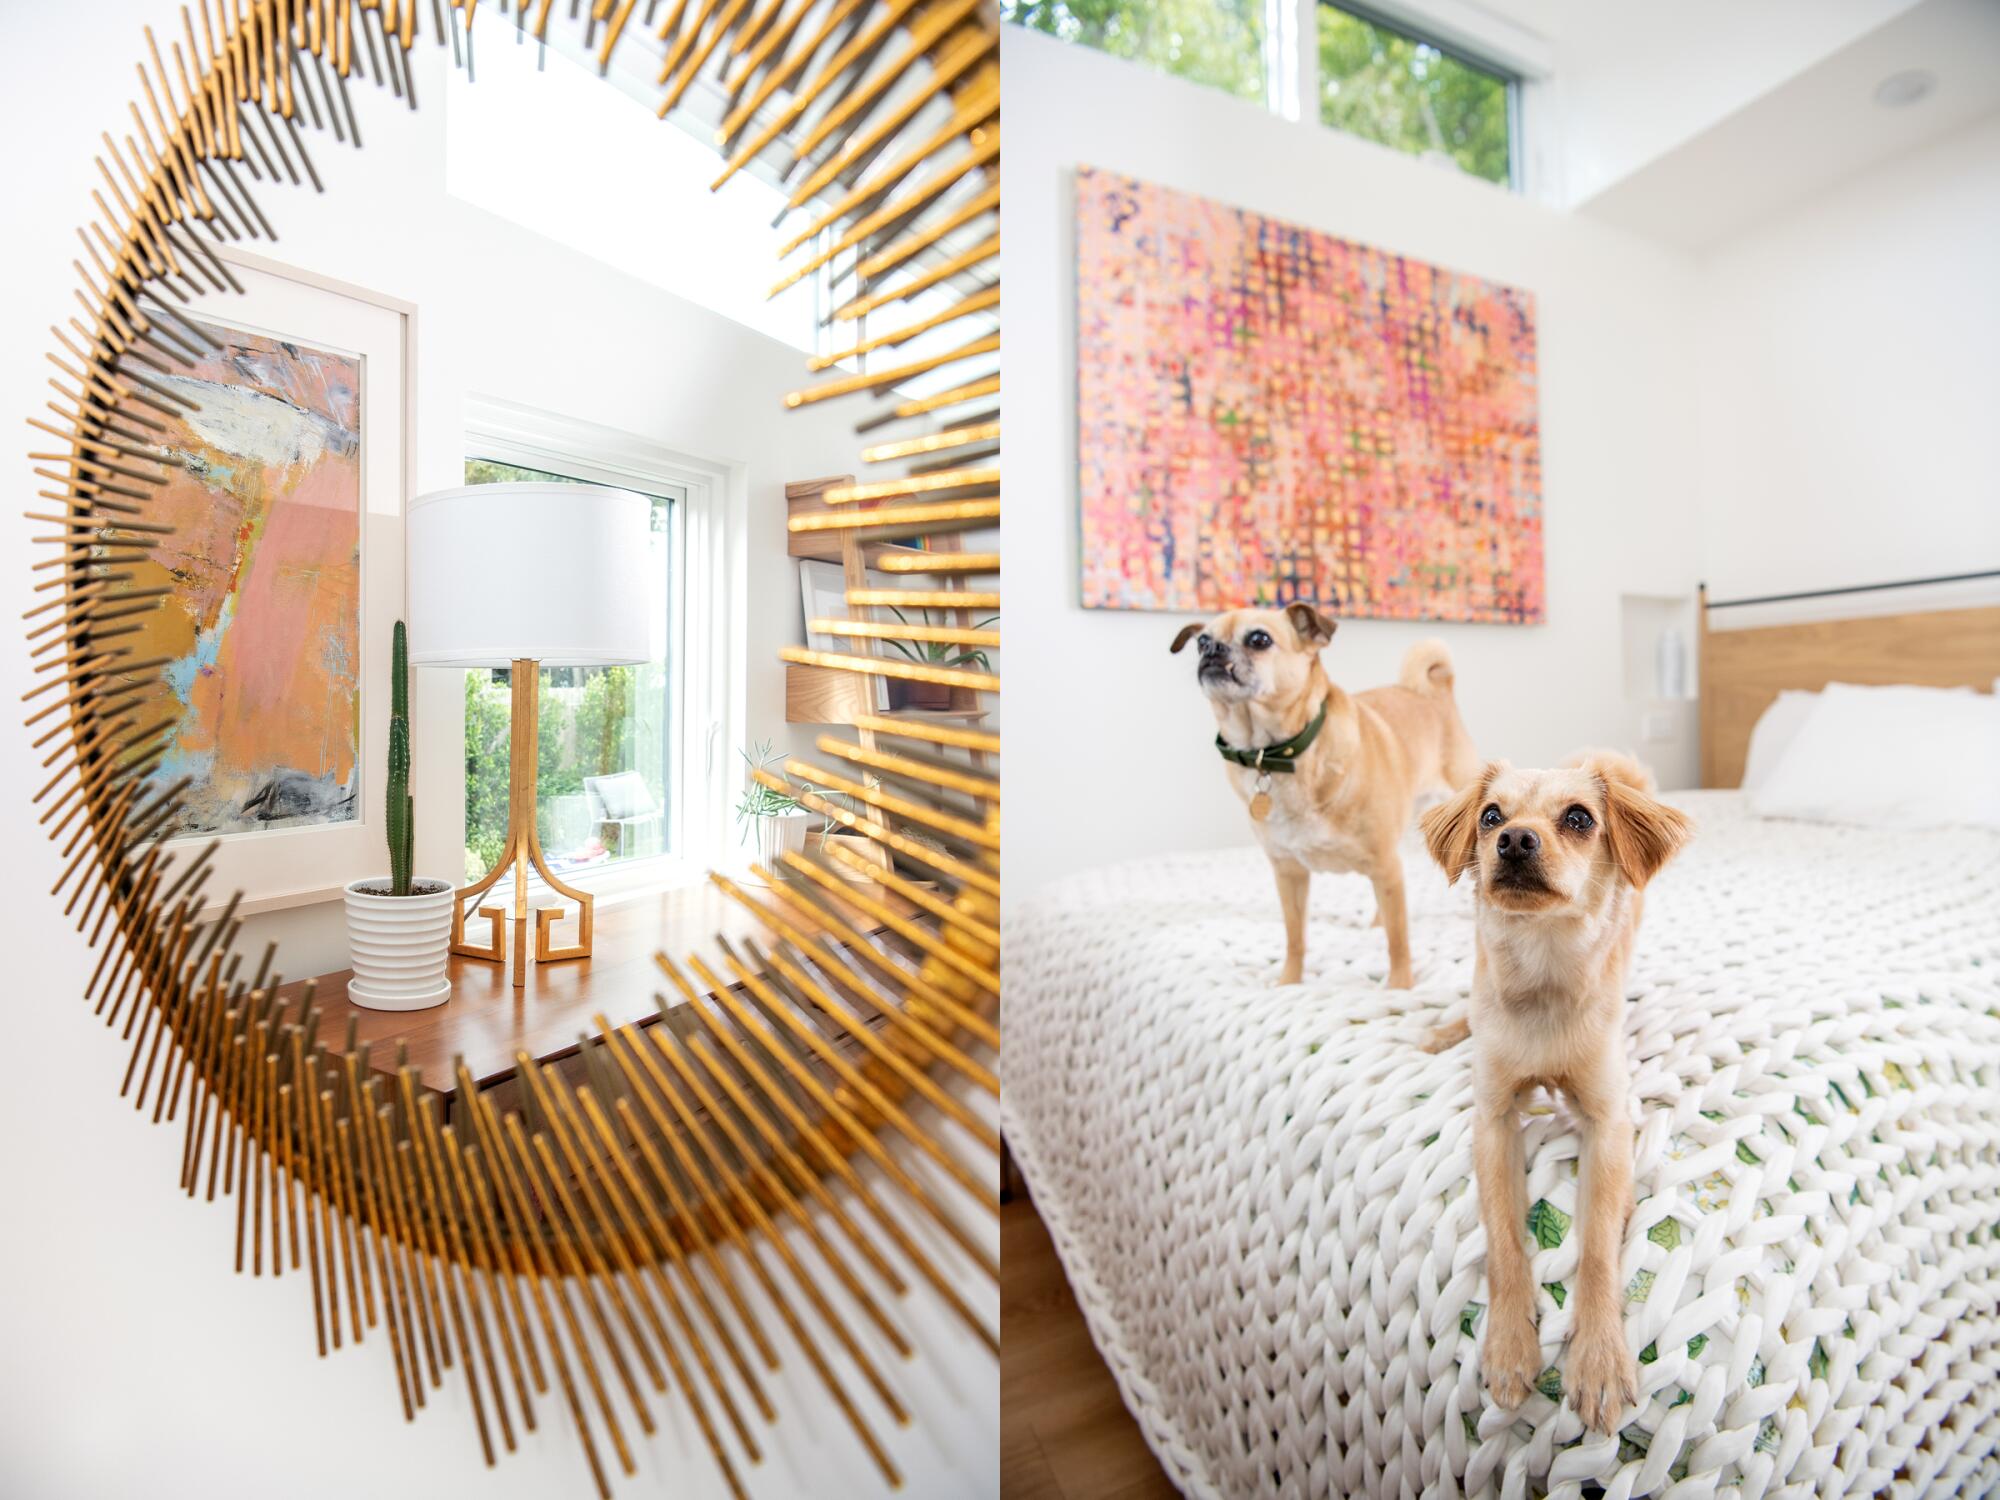 Two photos side by side, one of a mirror reflecting details in a bedroom, the other of a pair of dogs sitting on a bed.